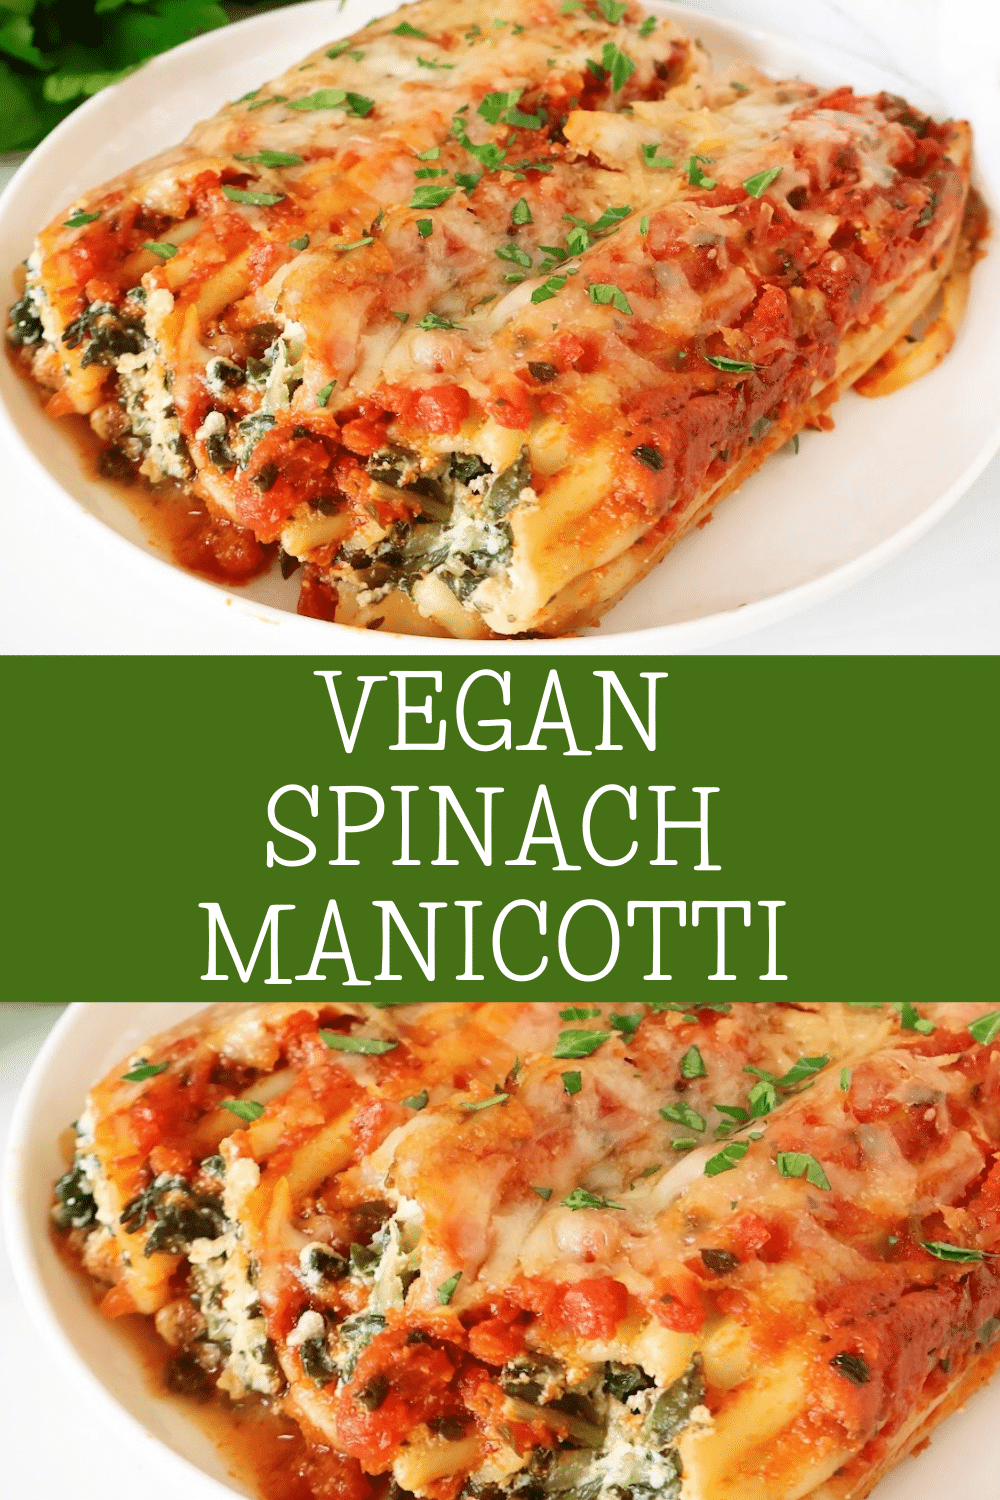 Spinach Manicotti ~ A rich and satisfying plant-based version of the classic Italian pasta dish. Easy no-boil recipe! via @thiswifecooks